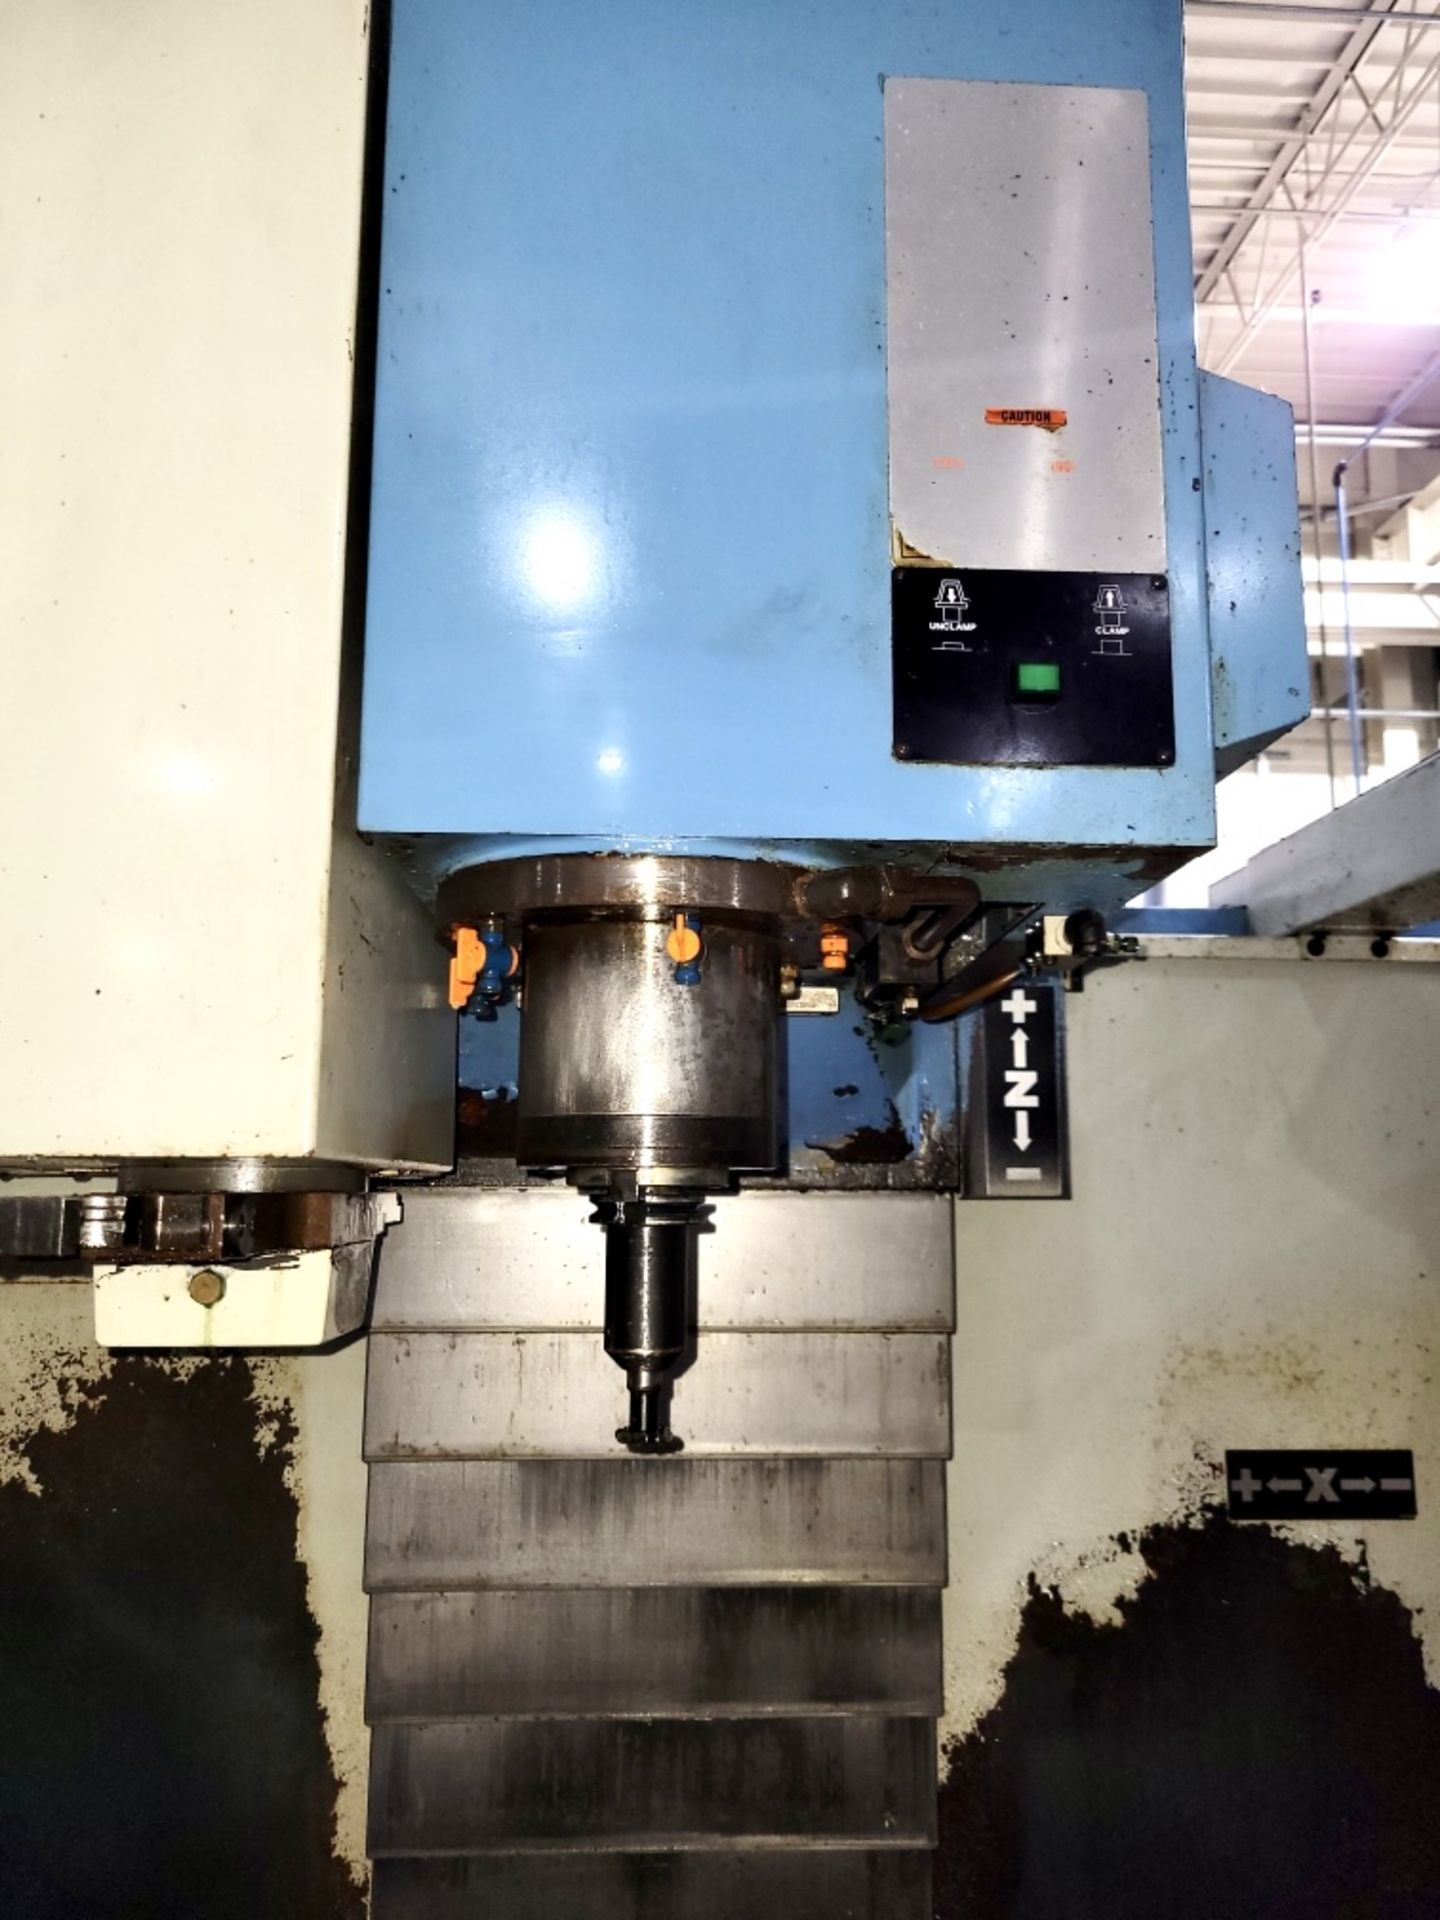 Supermax YCM-V105A 4-Axis CNC Vertical Machining Center, S/N 810181 - Image 3 of 13